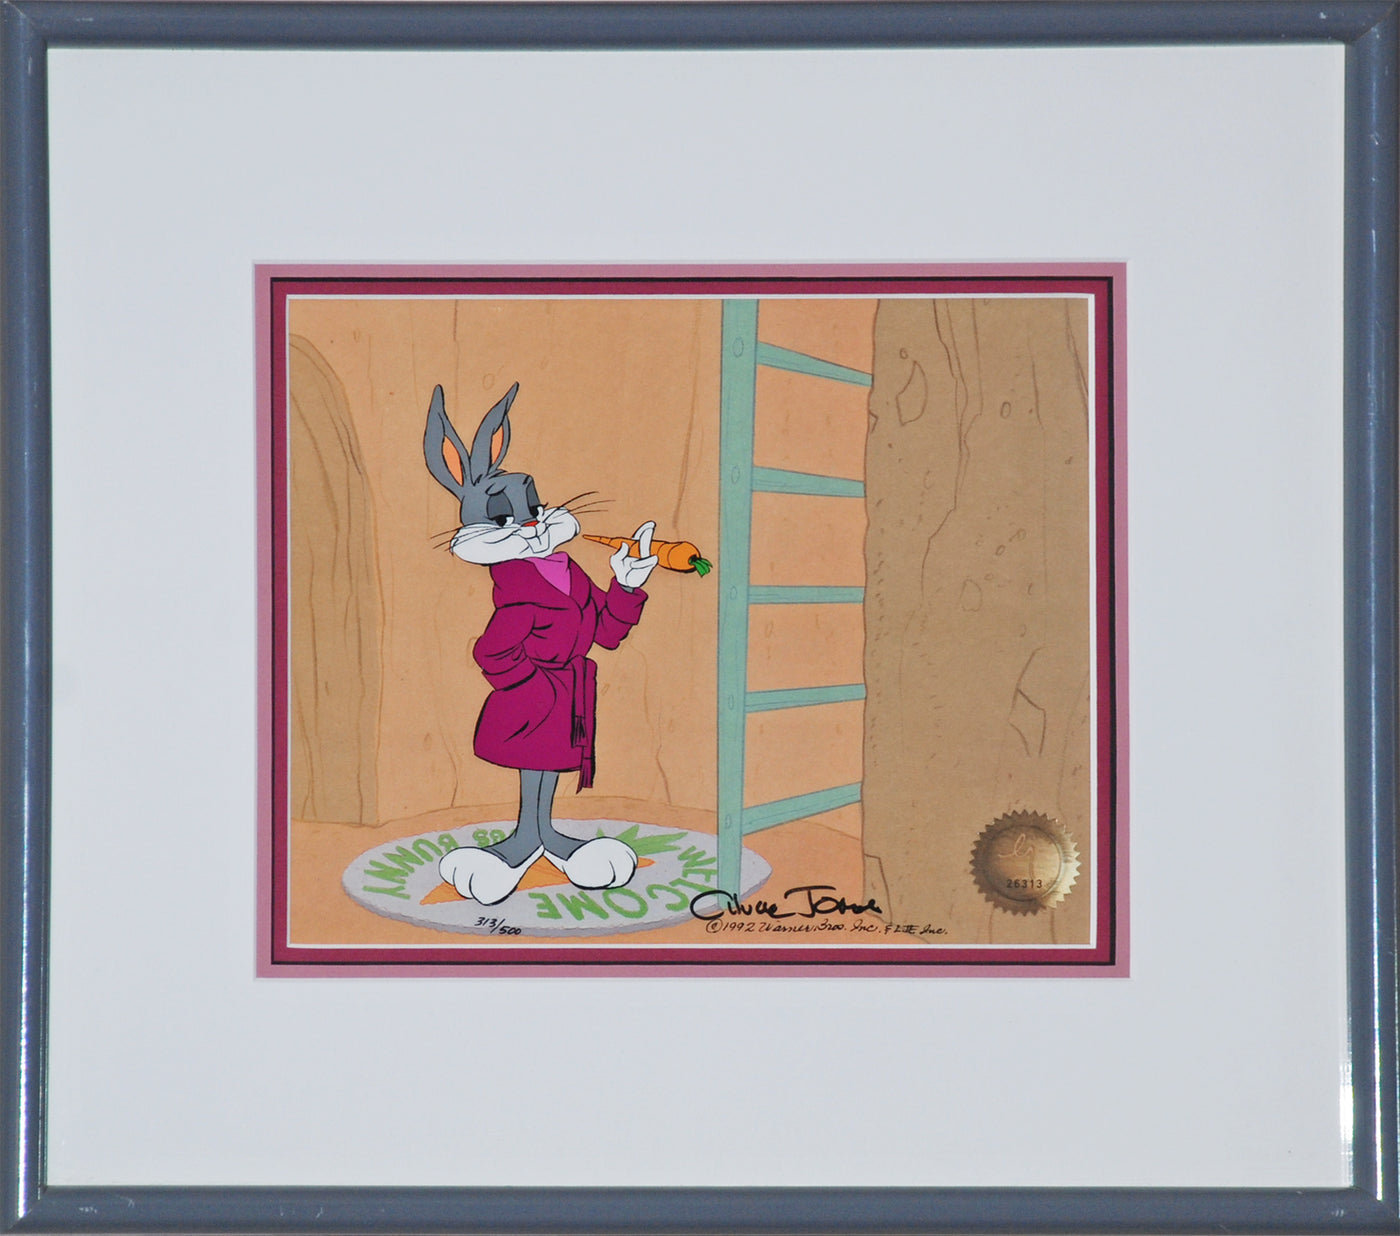 Original Warner Brothers Limited Edition Cel featuring Bugs Bunny